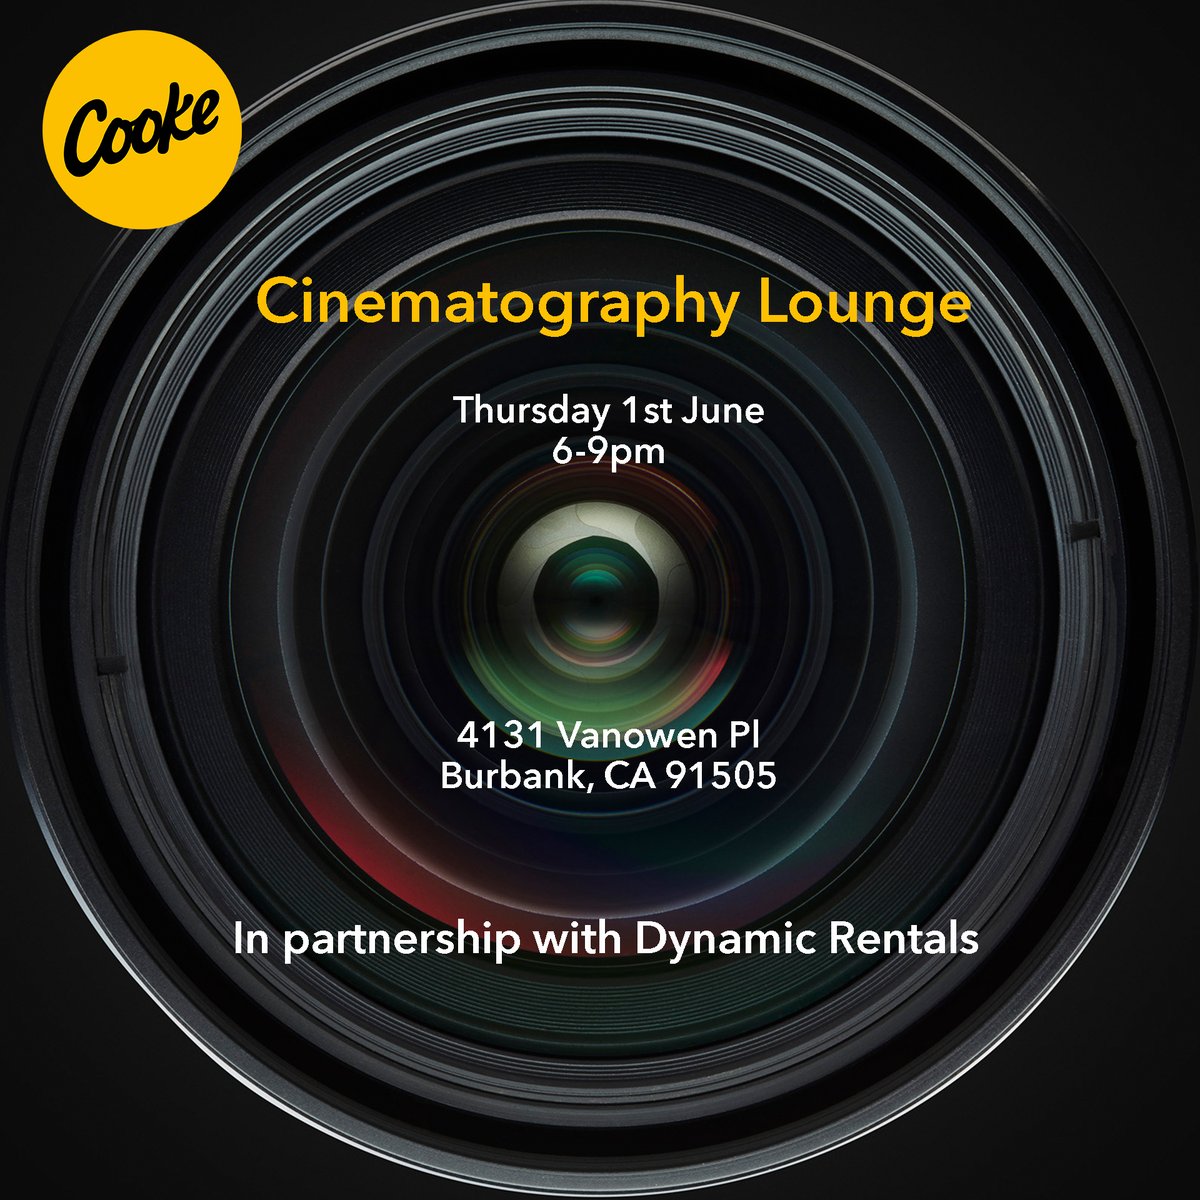 Visit Cooke Cinematography Lounge in our Burbank Creative Centre tomorrow to celebrate the opening of the @CineGearExpo in partnership with Dynamic Rentals #cooke #cinematography #filmmaking #2023CineGearExpoLA